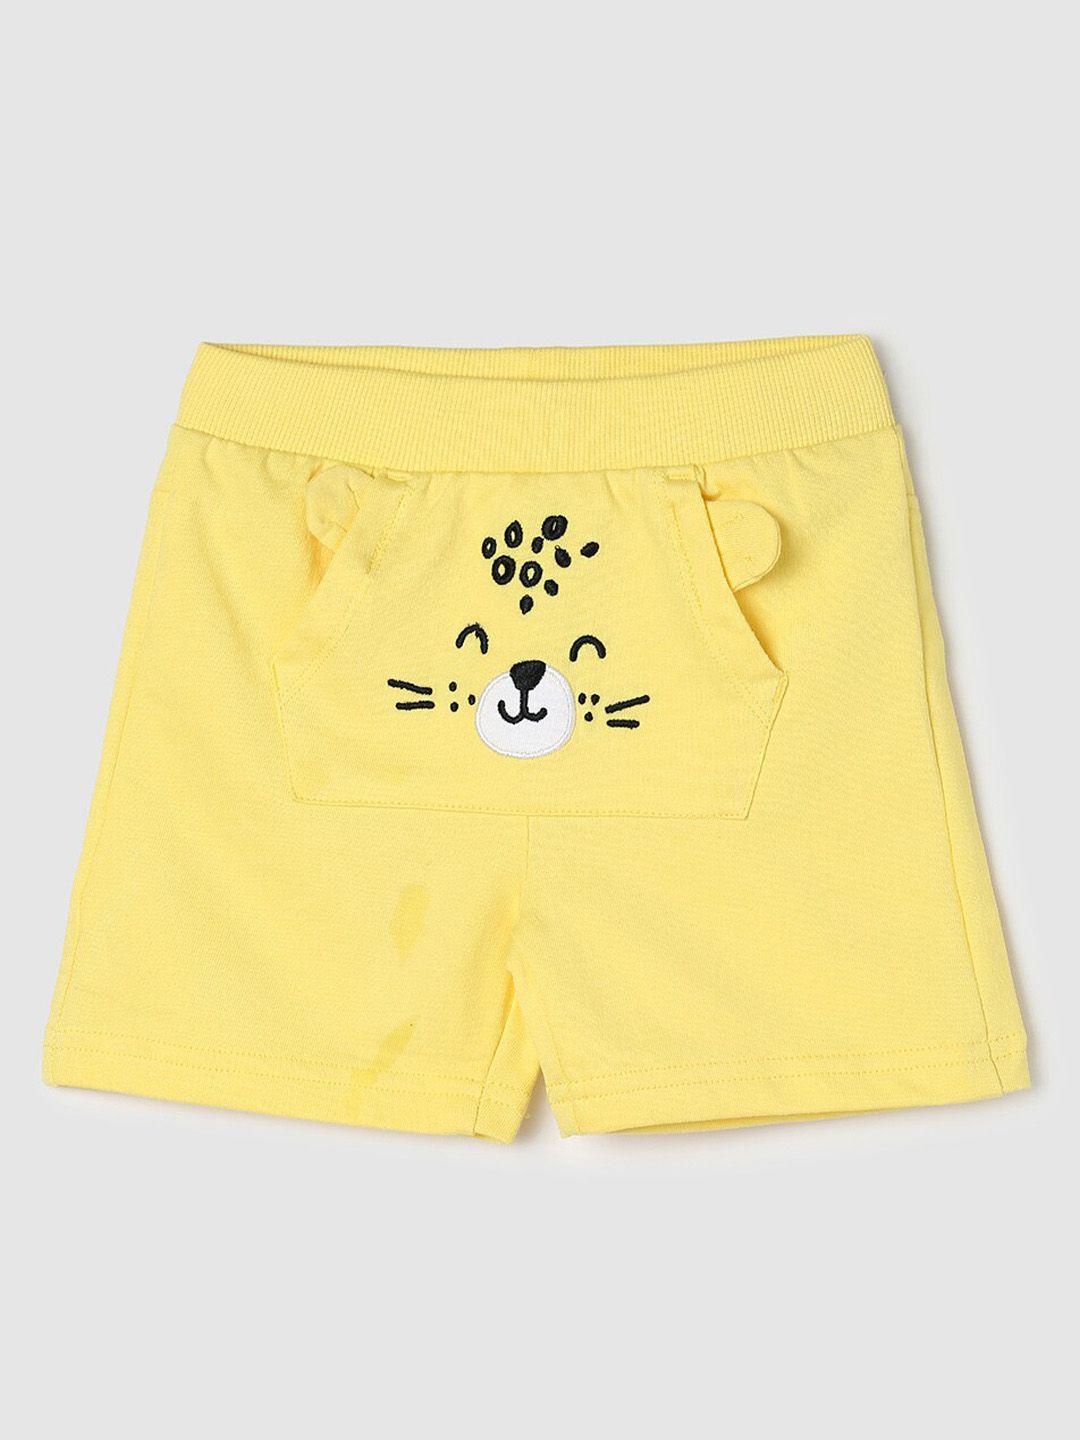 max-boys-graphic-printed-mid-rise-pure-cotton-shorts